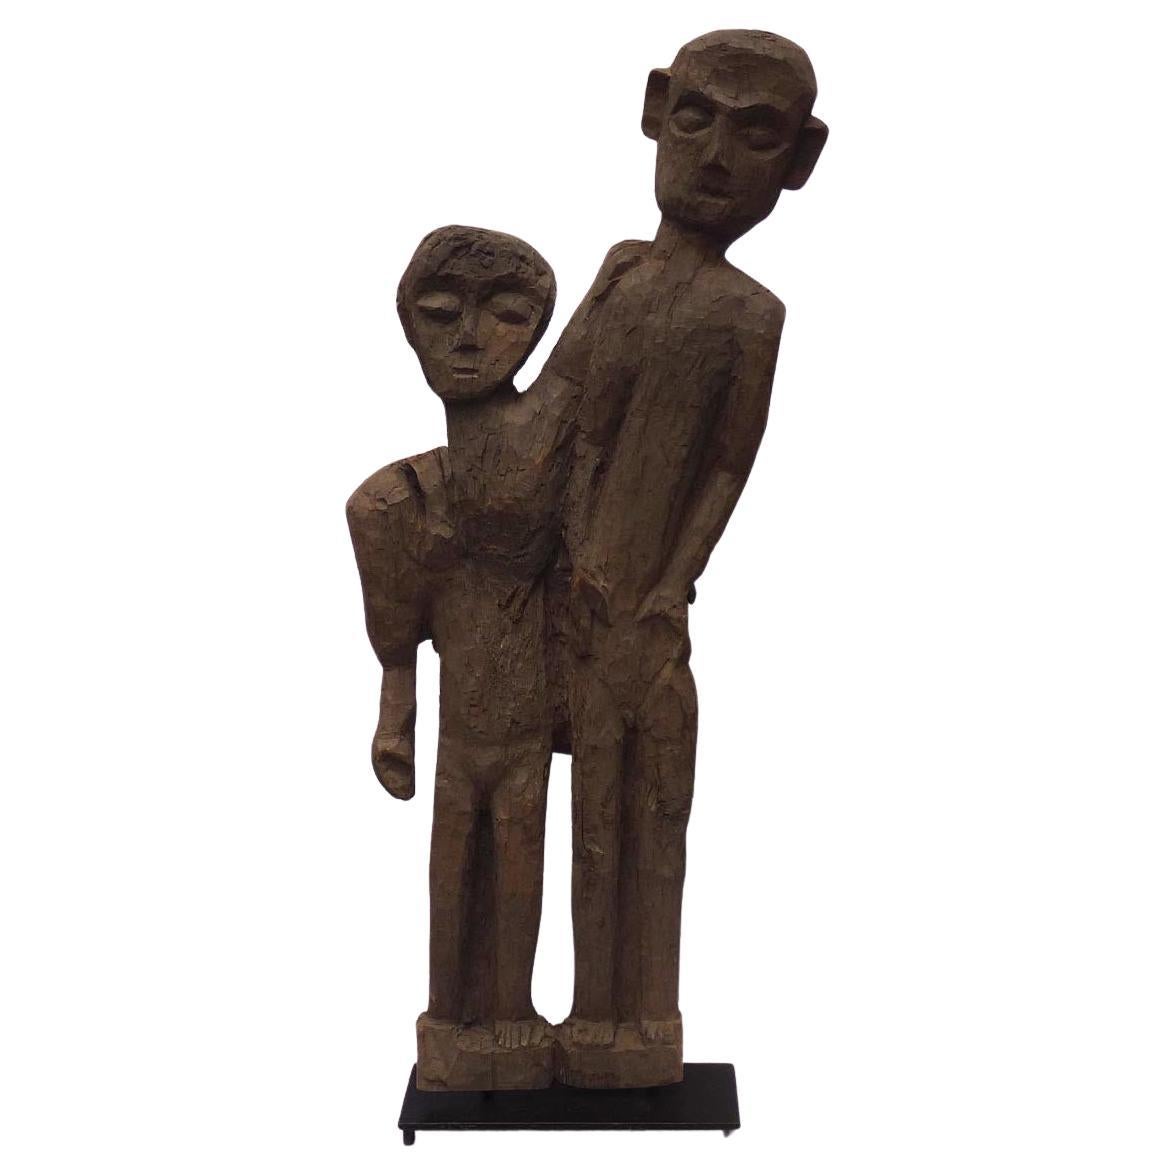 Old 4 foot high naive and stylized carving of two people from 1 slab of wood For Sale